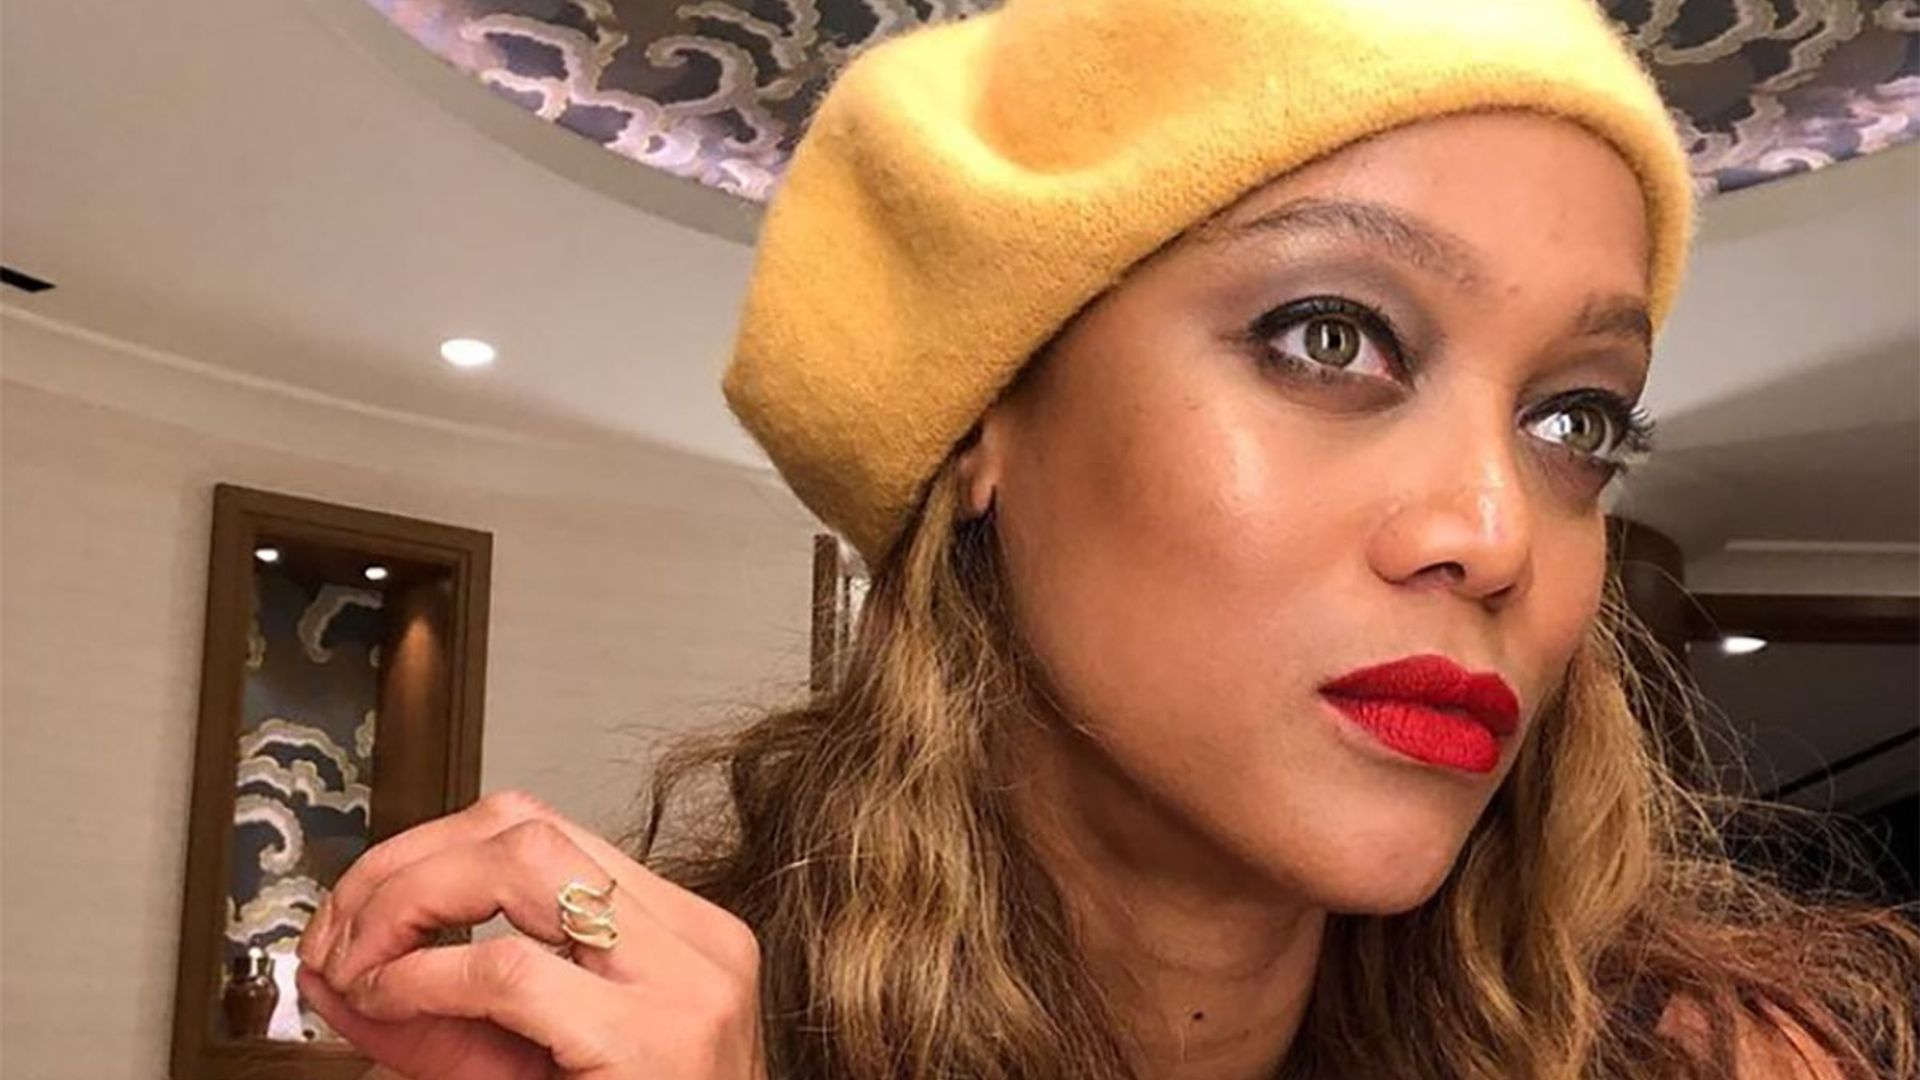 Tyra Banks shocks fans with very ‘real’ before-and-after photos